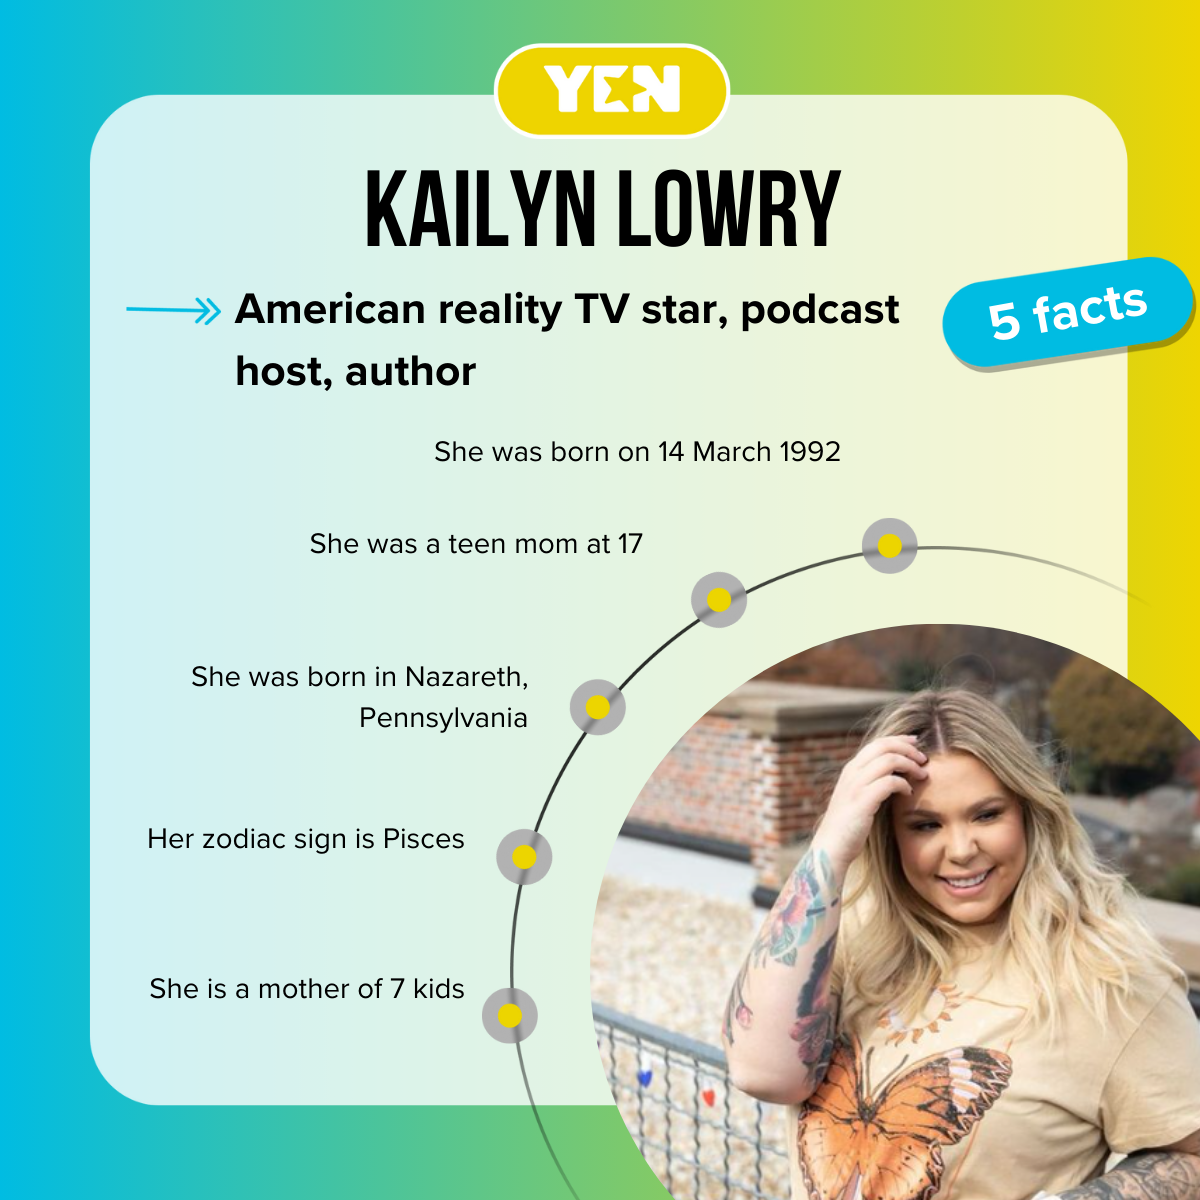 Quick facts about Kailyn Lowry